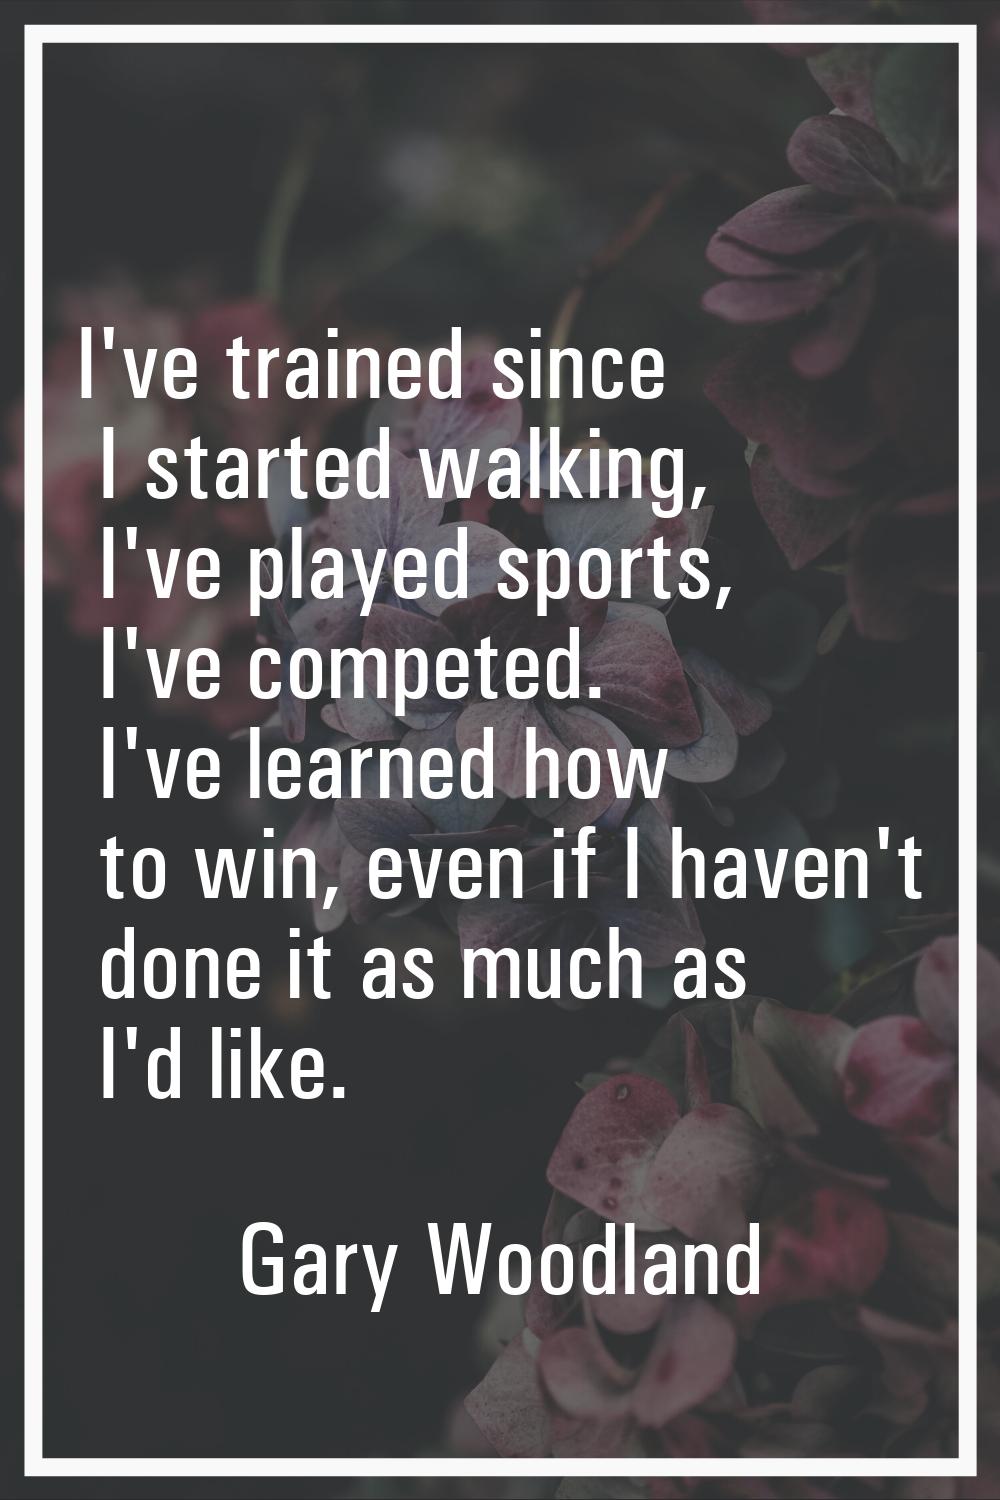 I've trained since I started walking, I've played sports, I've competed. I've learned how to win, e